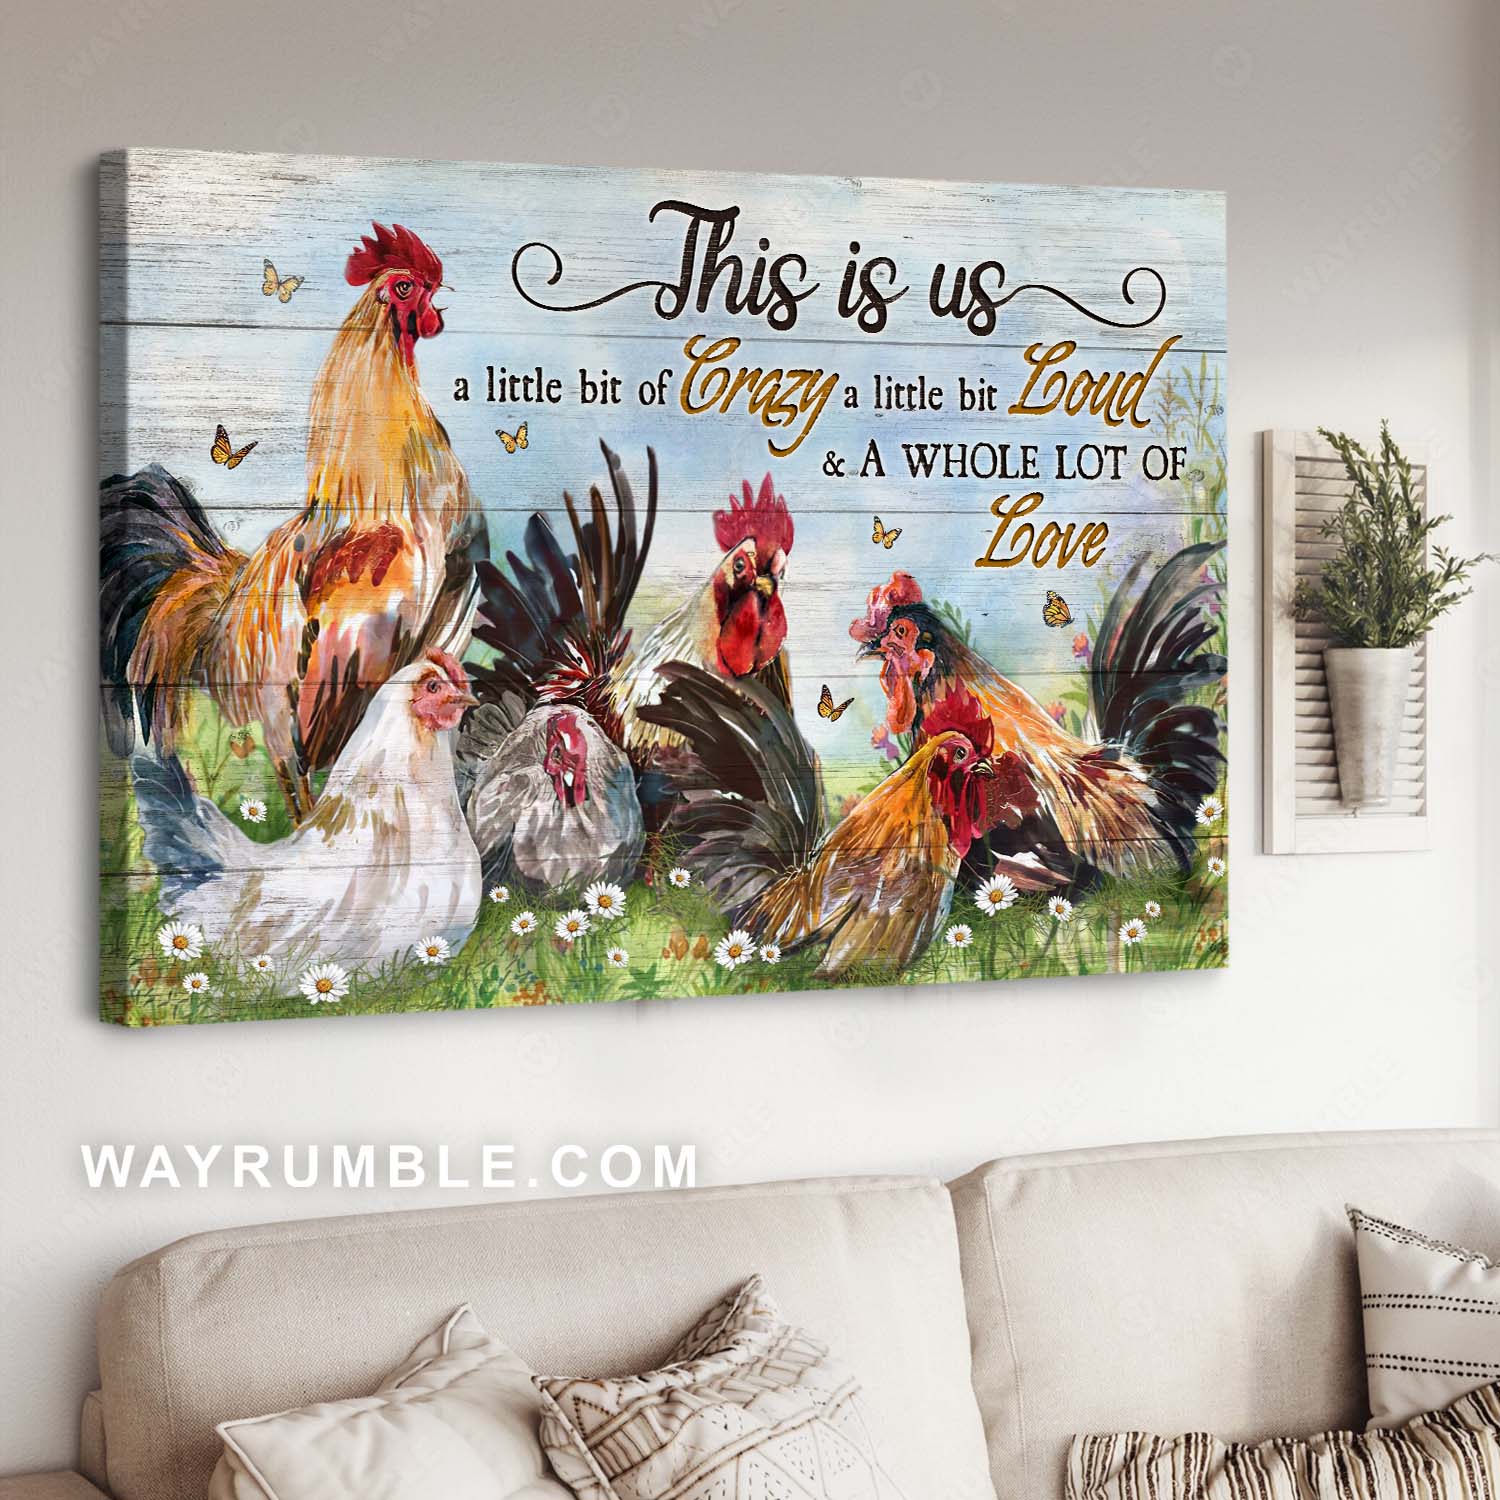 Chicken drawing, Farm animals, Daisy garden, Monarch butterfly, This is us - Jesus Landscape Canvas Prints, Home Decor Wall Art